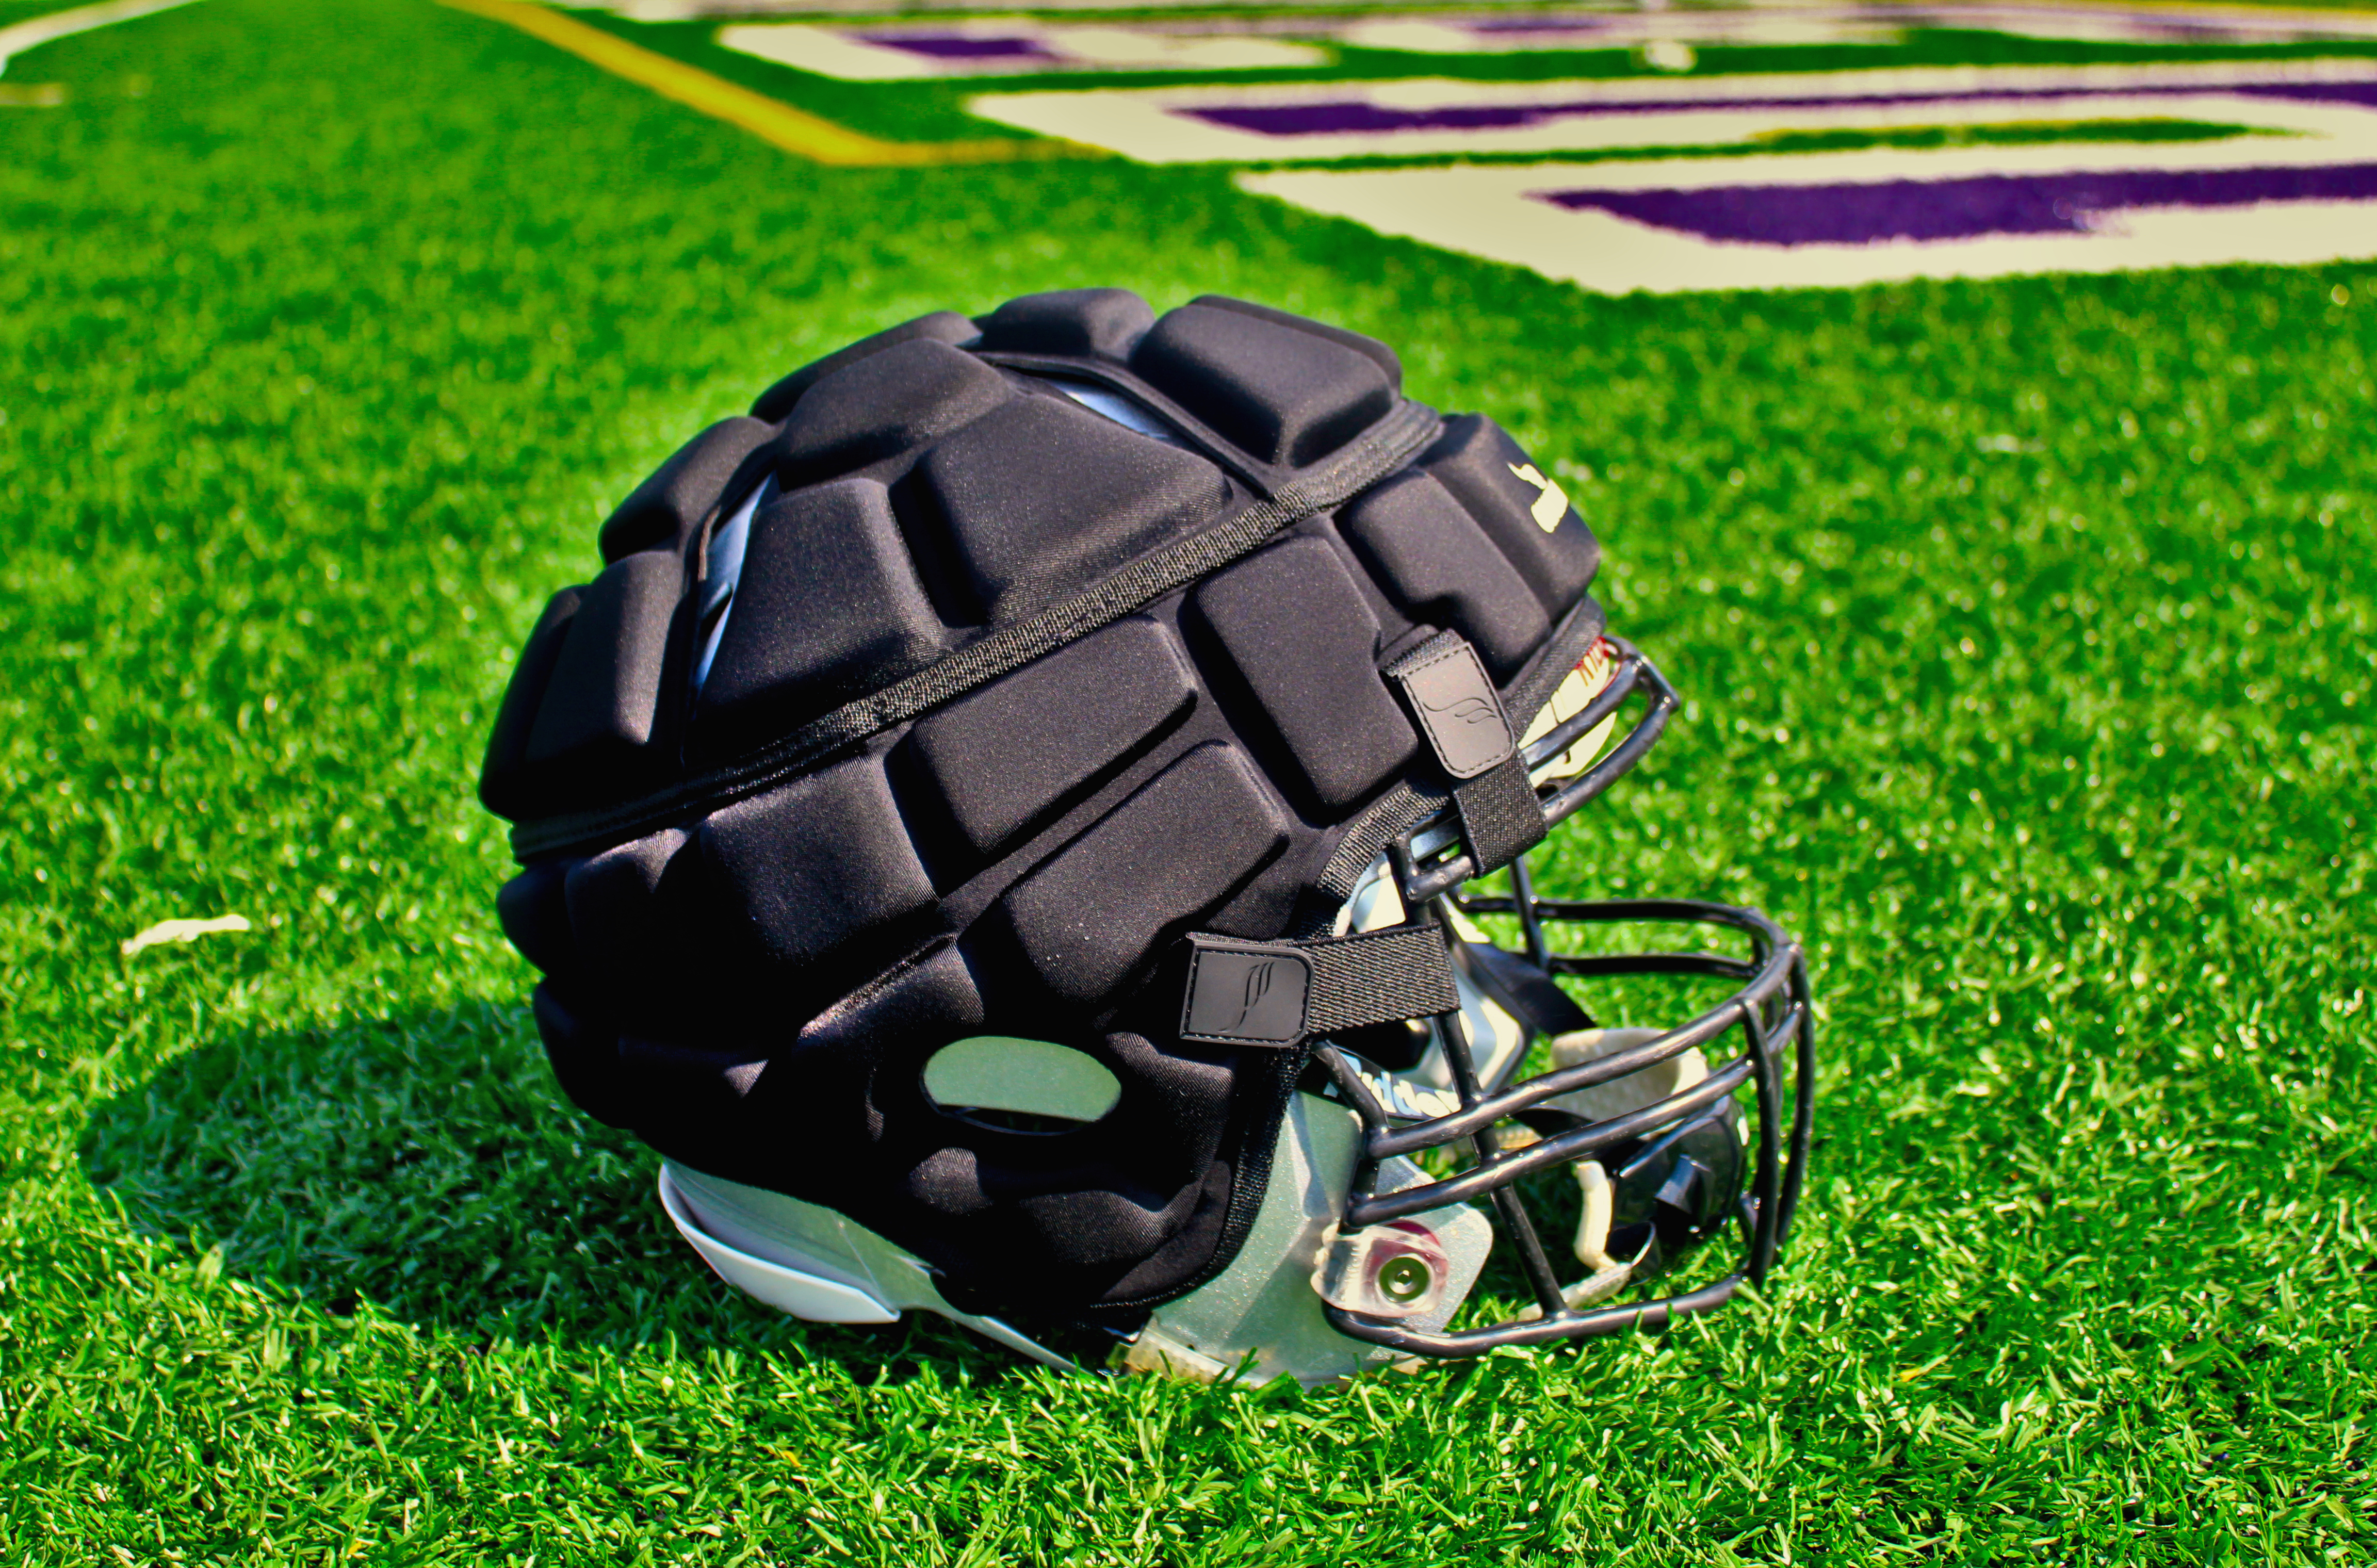 Guardian Caps added to help reduce football concussions  The Witmarsum